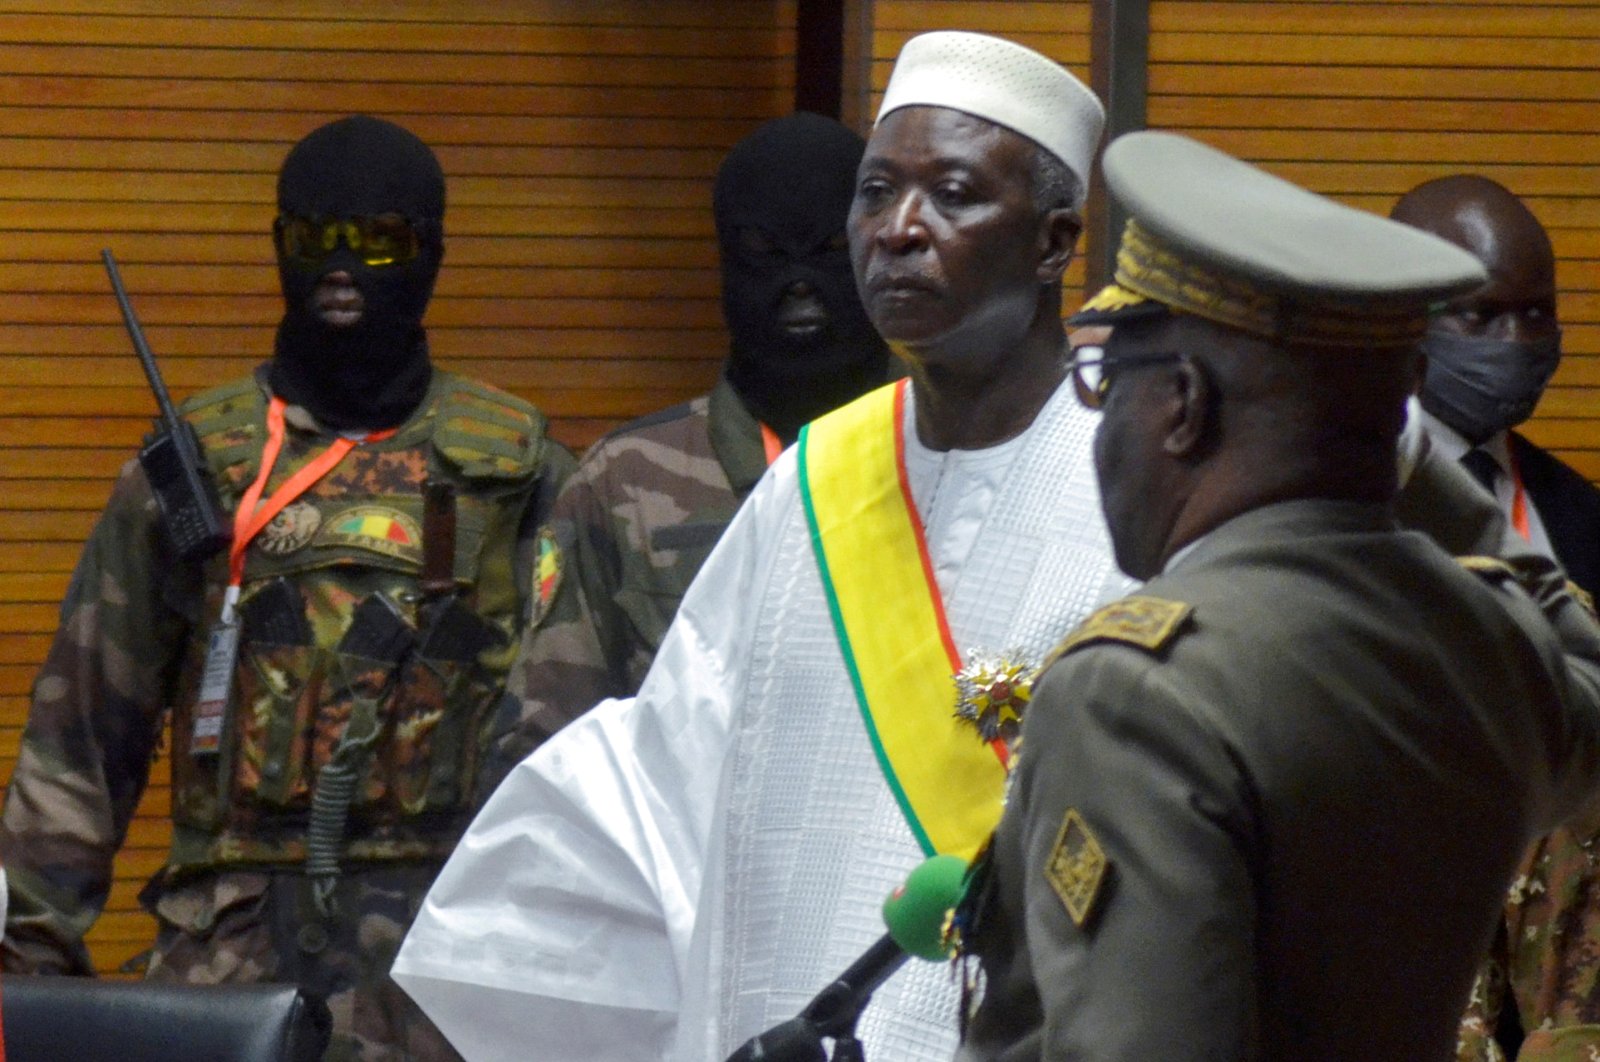 The new interim president of Mali Bah Ndaw is sworn in during the Inauguration ceremony in Bamako, Mali September 25, 2020. (Reuters Photo)